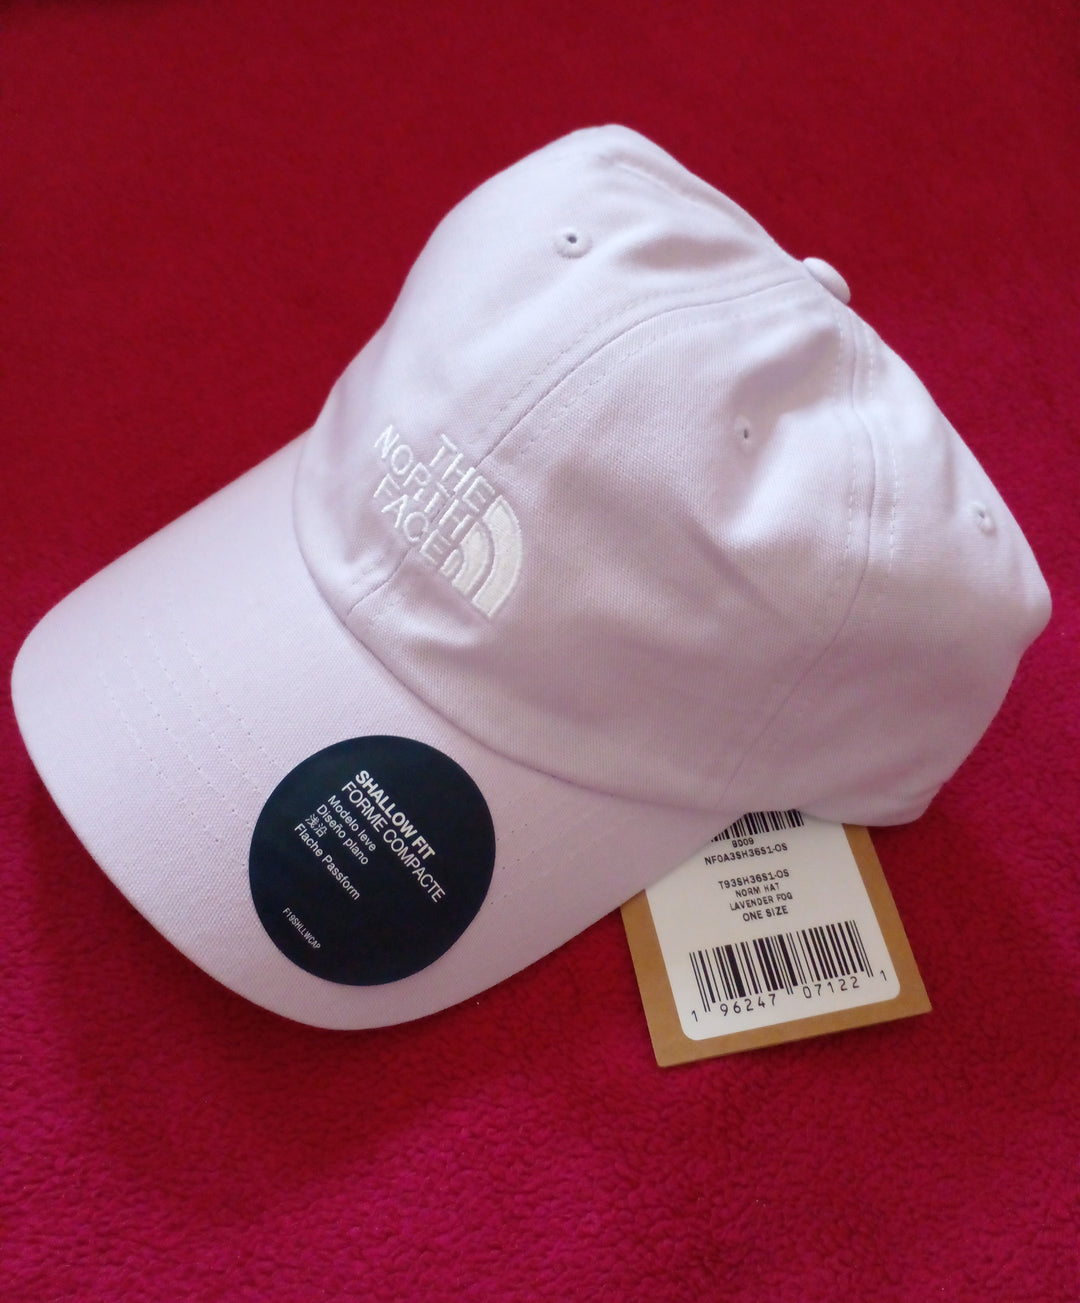 Image of The North Face cap